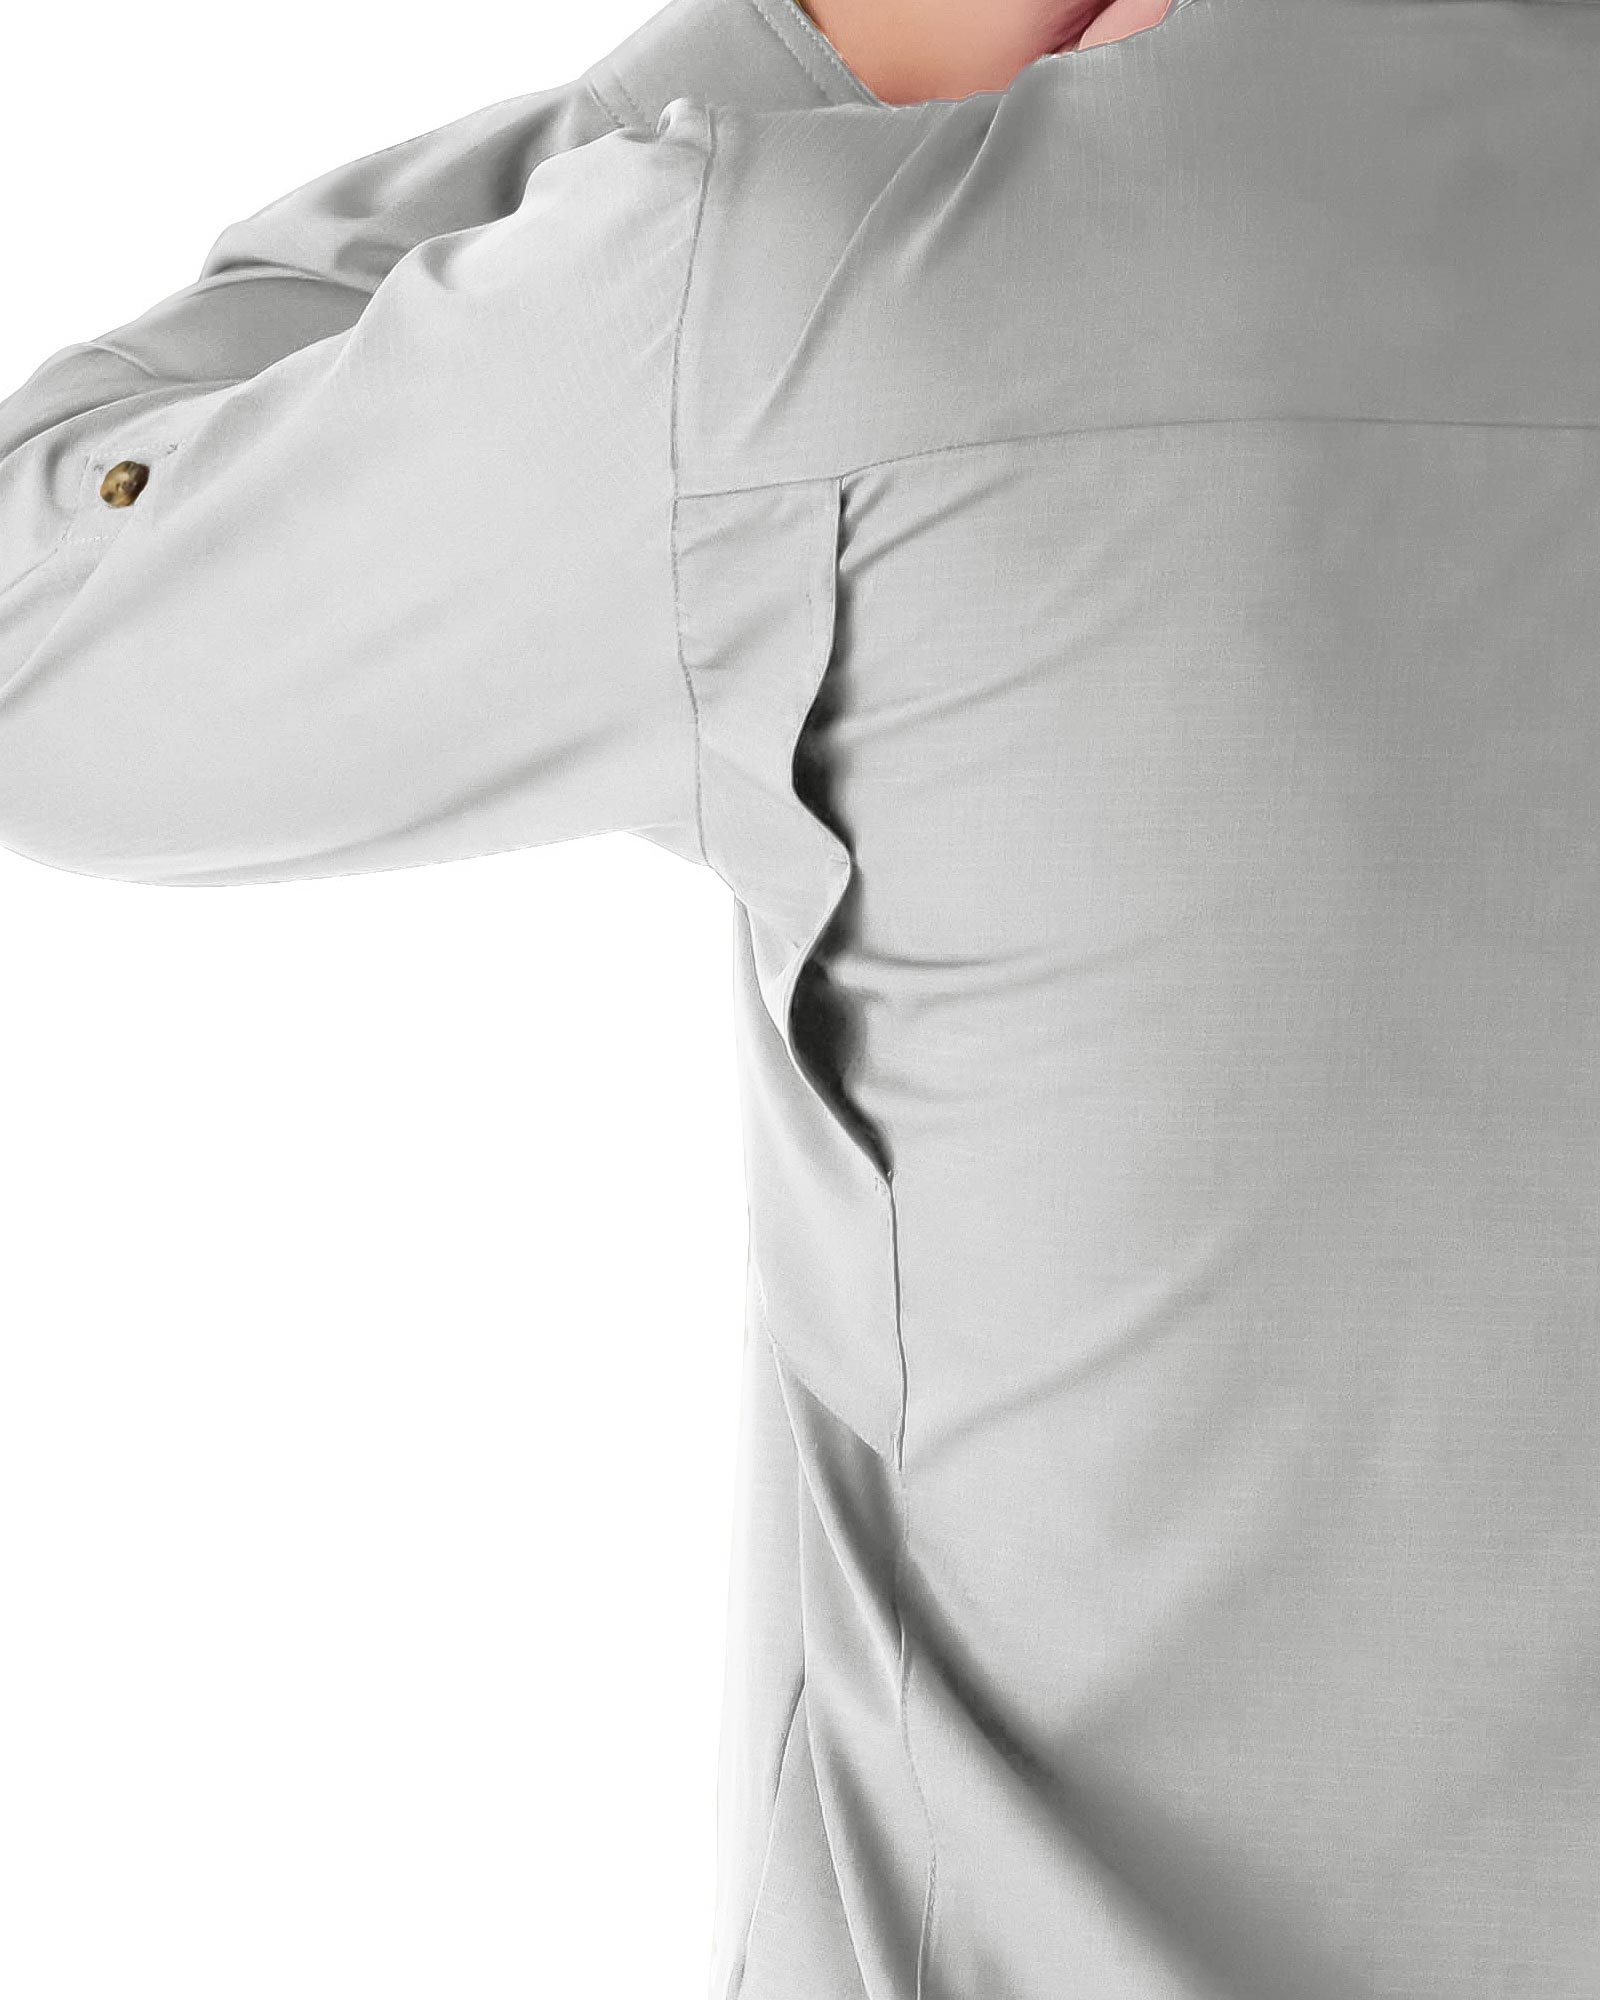 33,000ft Men's Long Sleeve Sun Protection Shirt UPF 50+ UV Quick Dry  Cooling Fishing Shirts for Travel Camping Hiking White Large